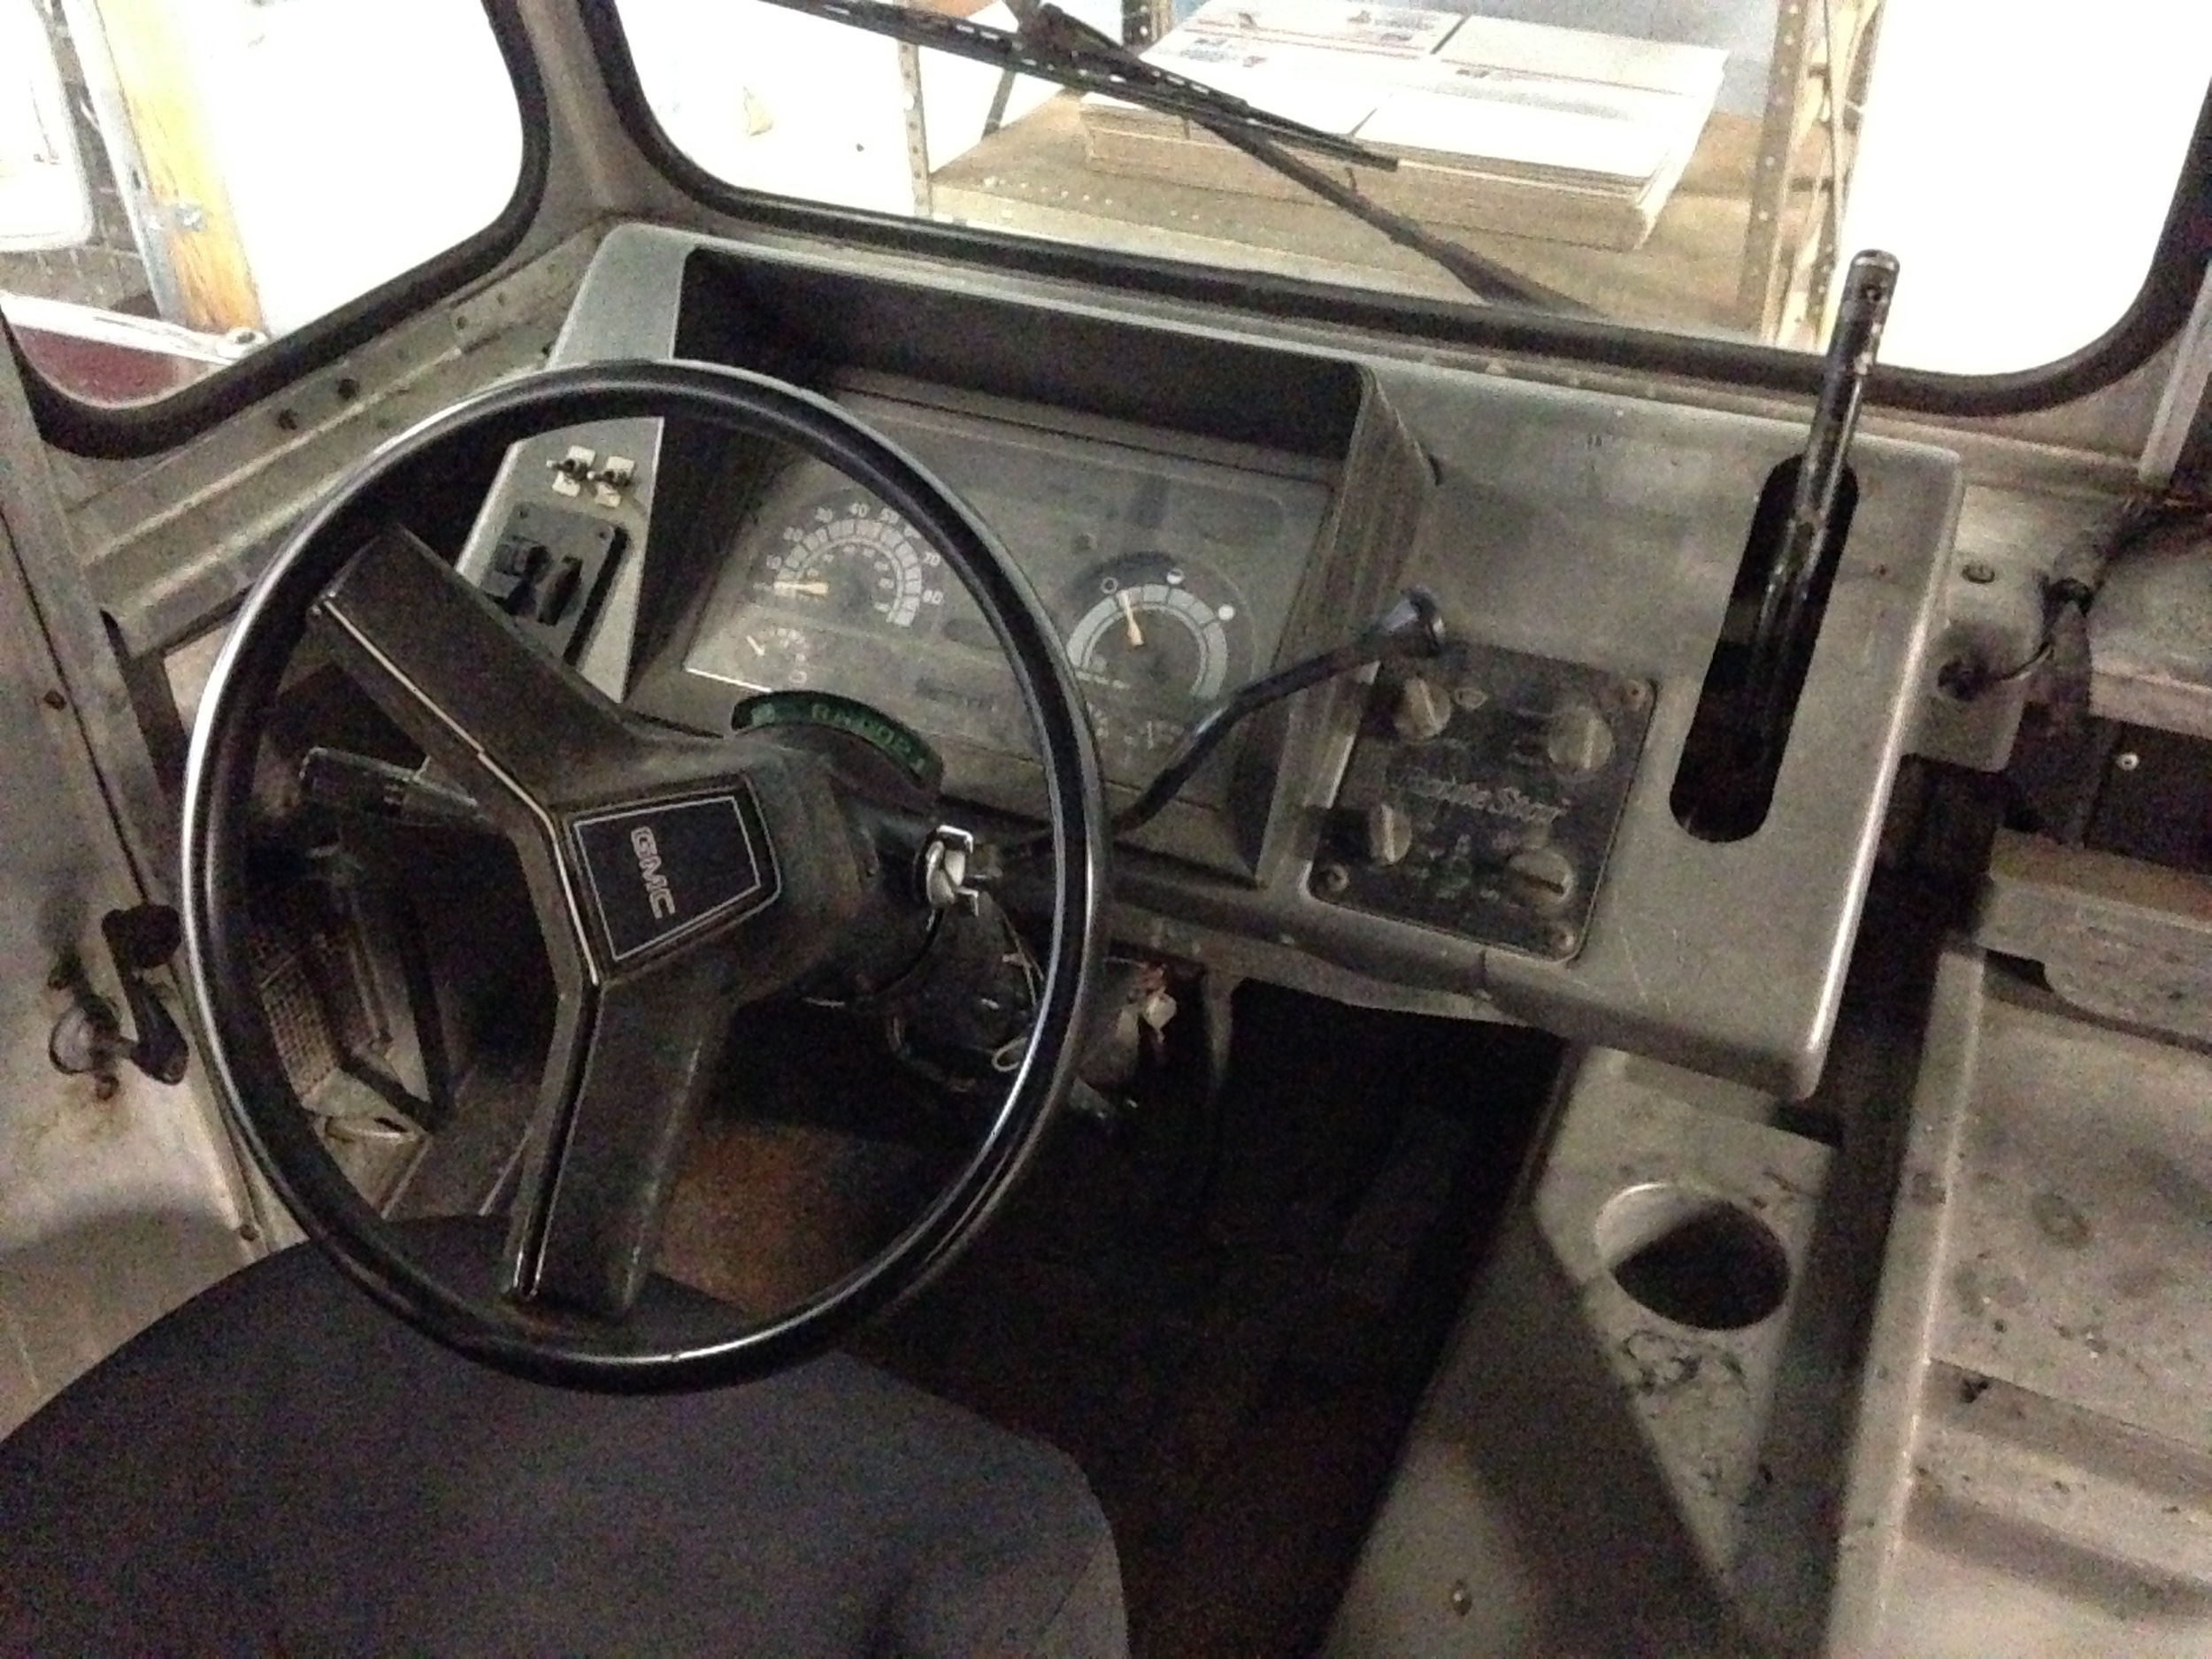 the whole dash is aluminum with some plastic/metal/glass fixtures. Needs a good cleaning.